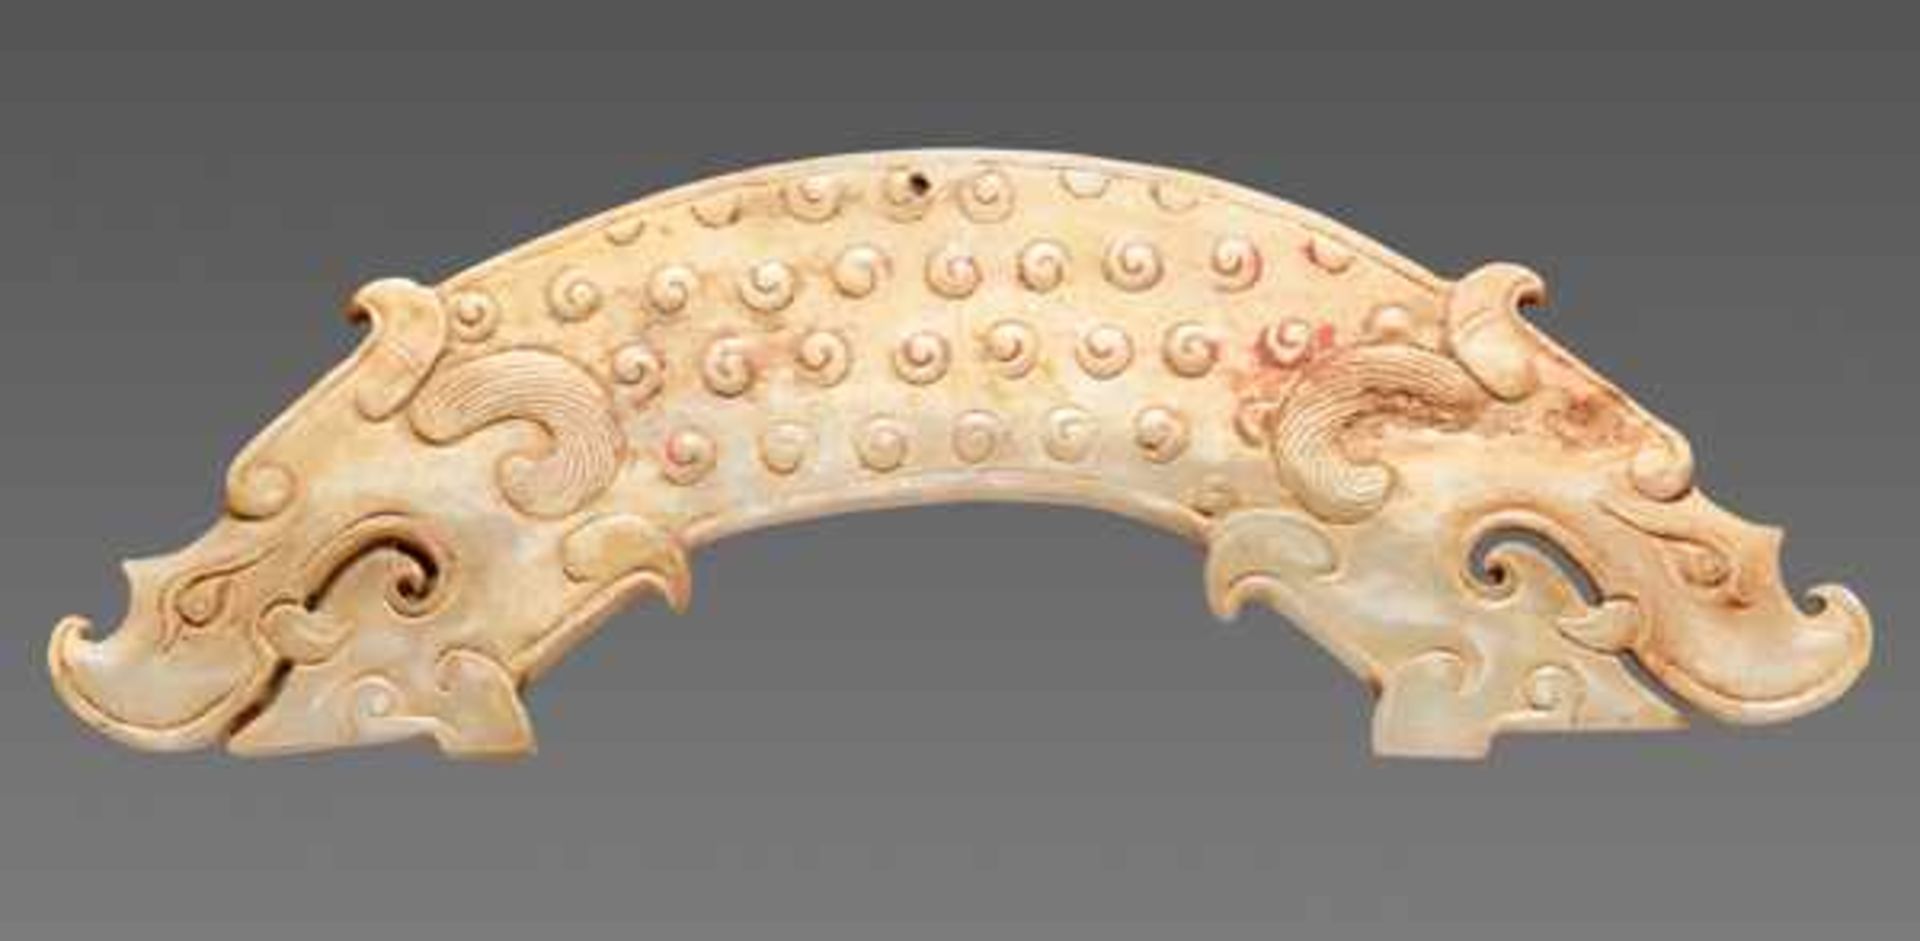 A POWERFUL HUANG ARCHED PENDANT WITH FINELY DETAILED DRAGON HEADS AND A PATTERN OF RAISED CURLS